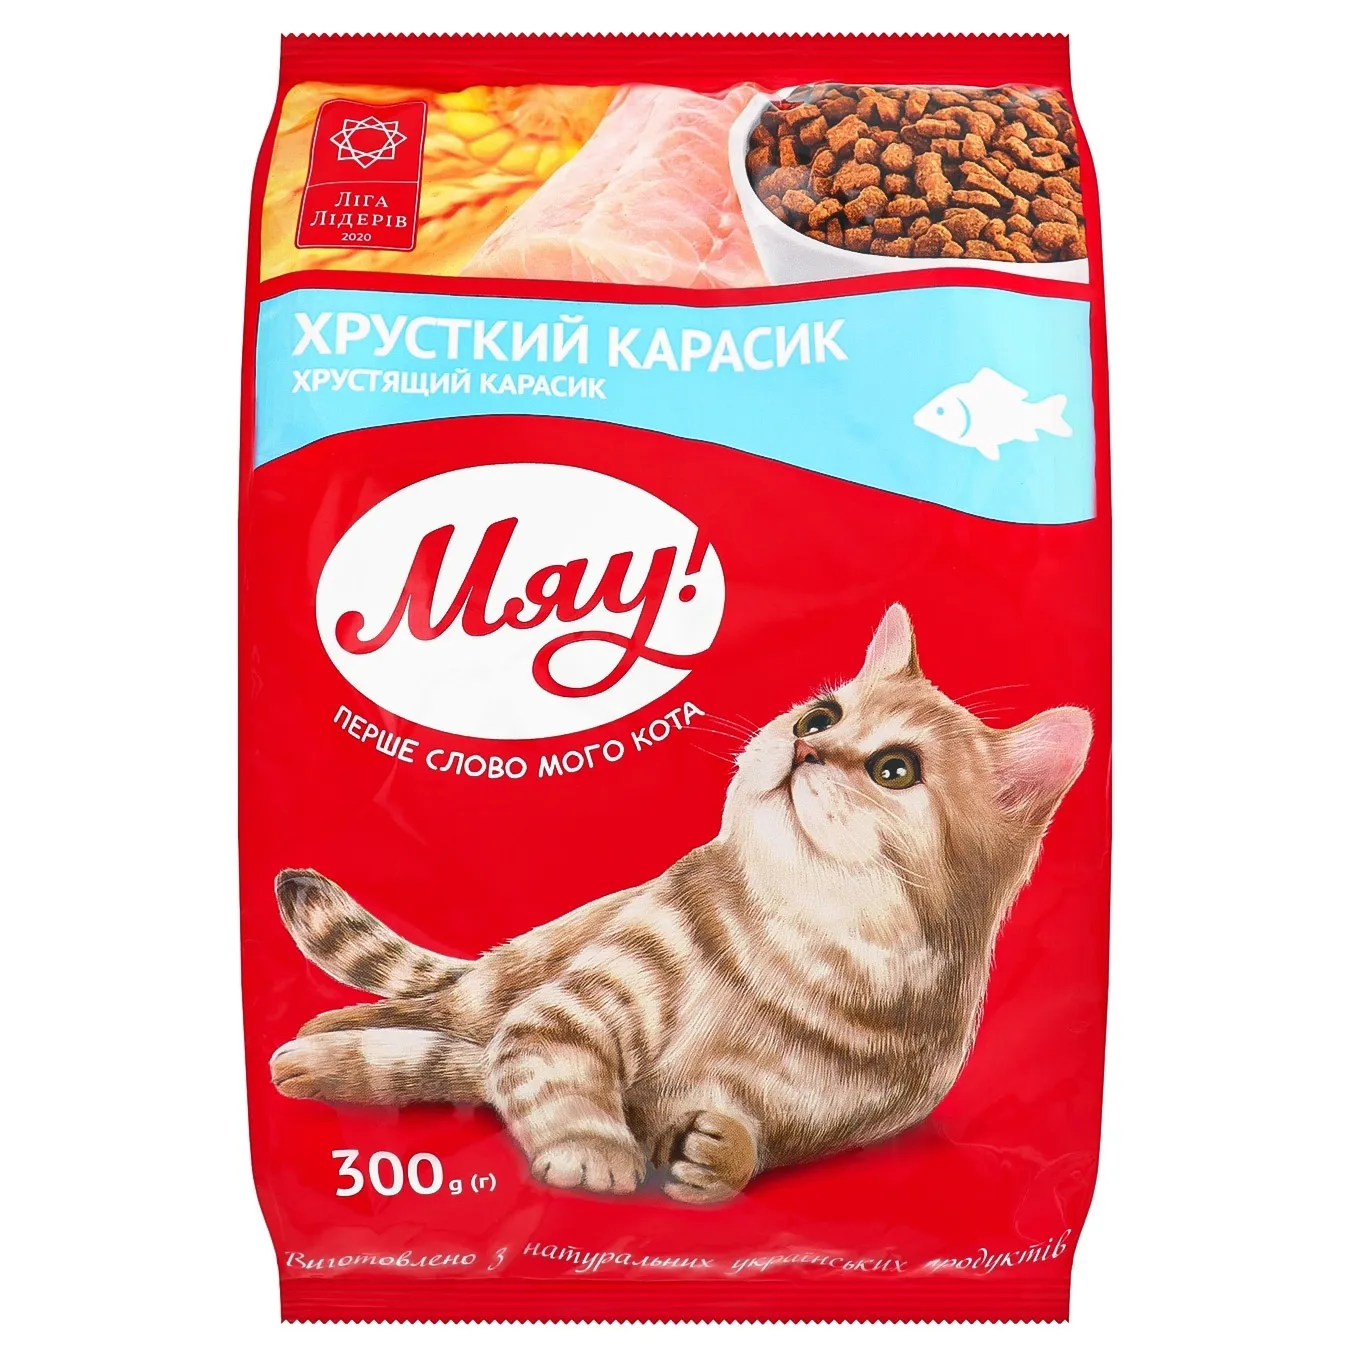 Meow! Dry feed for kittens 300g